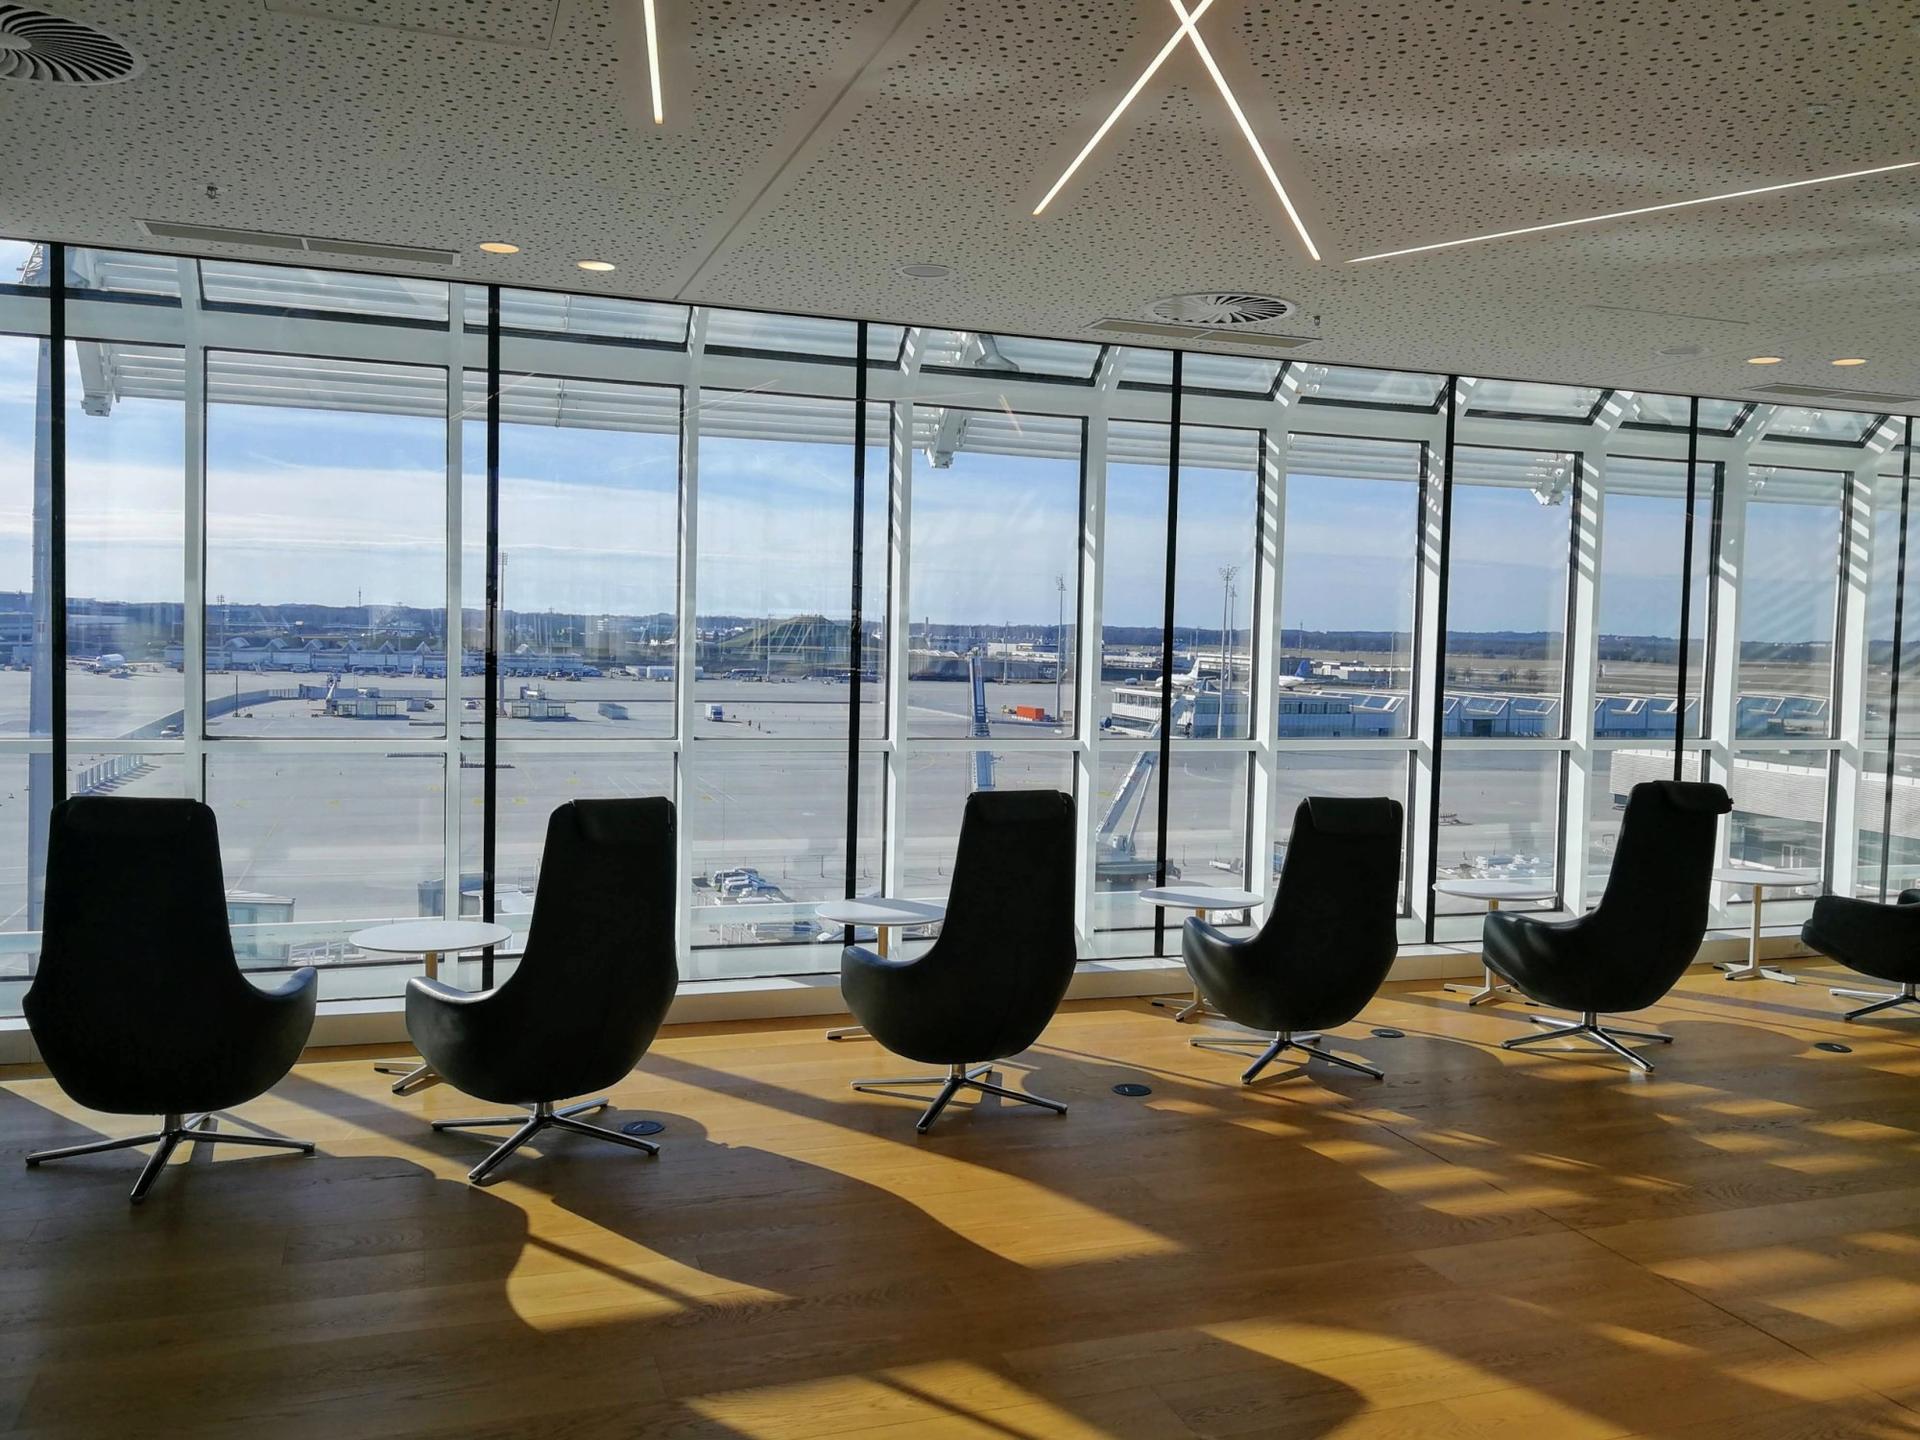 My experience with Munich Airport (MUC) Terminal 1 and Skyteam